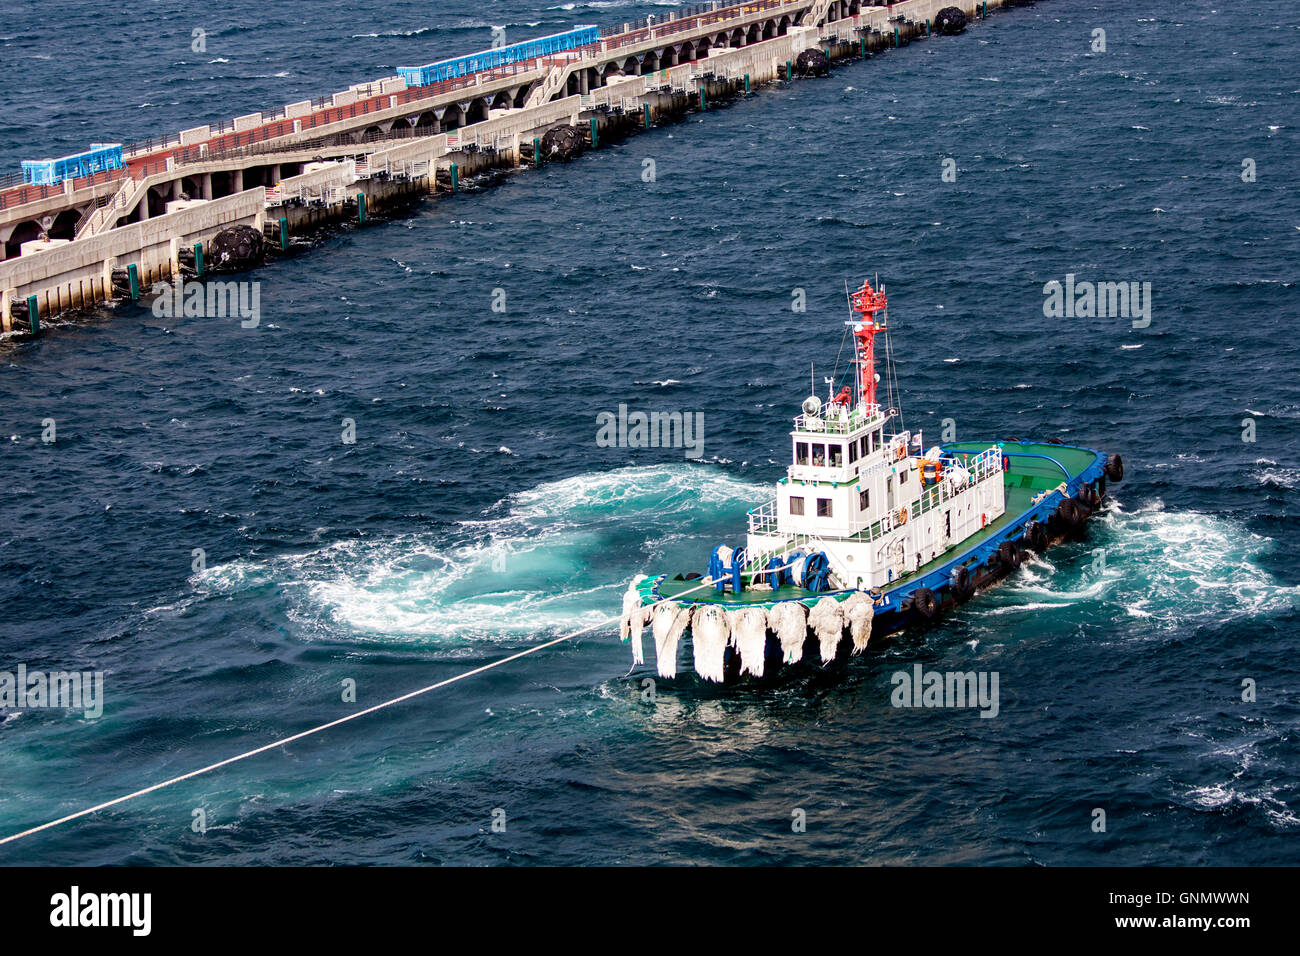 Tugboat prepares to tow cruise ship from difficult berth Stock Photo